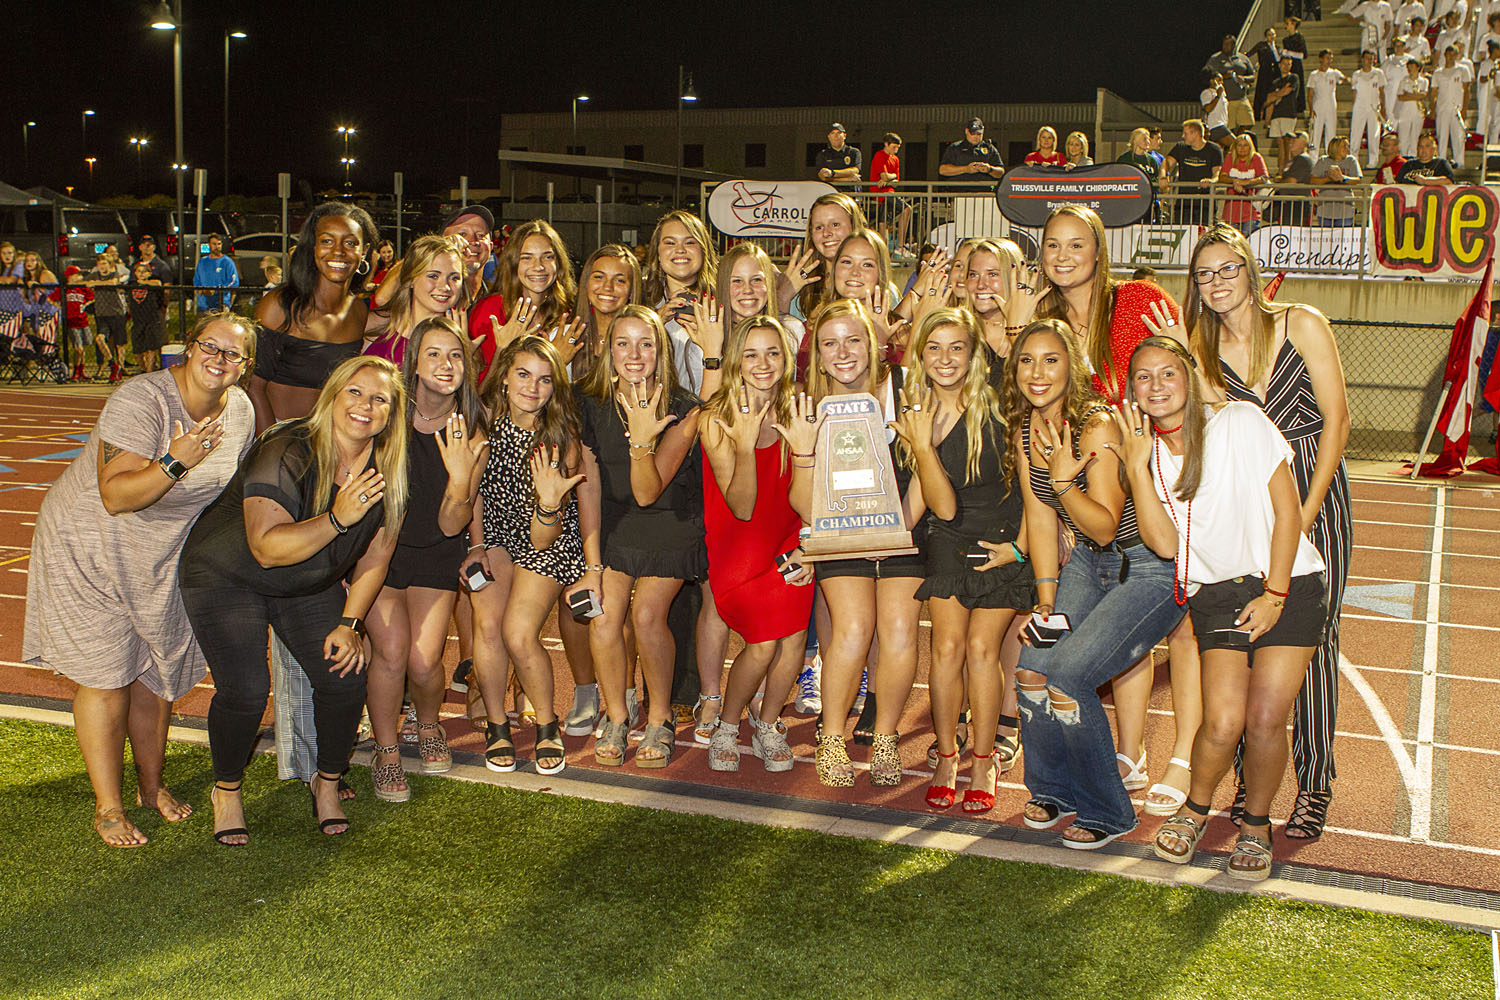 Hewitt-Trussville softball returns to field hungry for a second consecutive state title